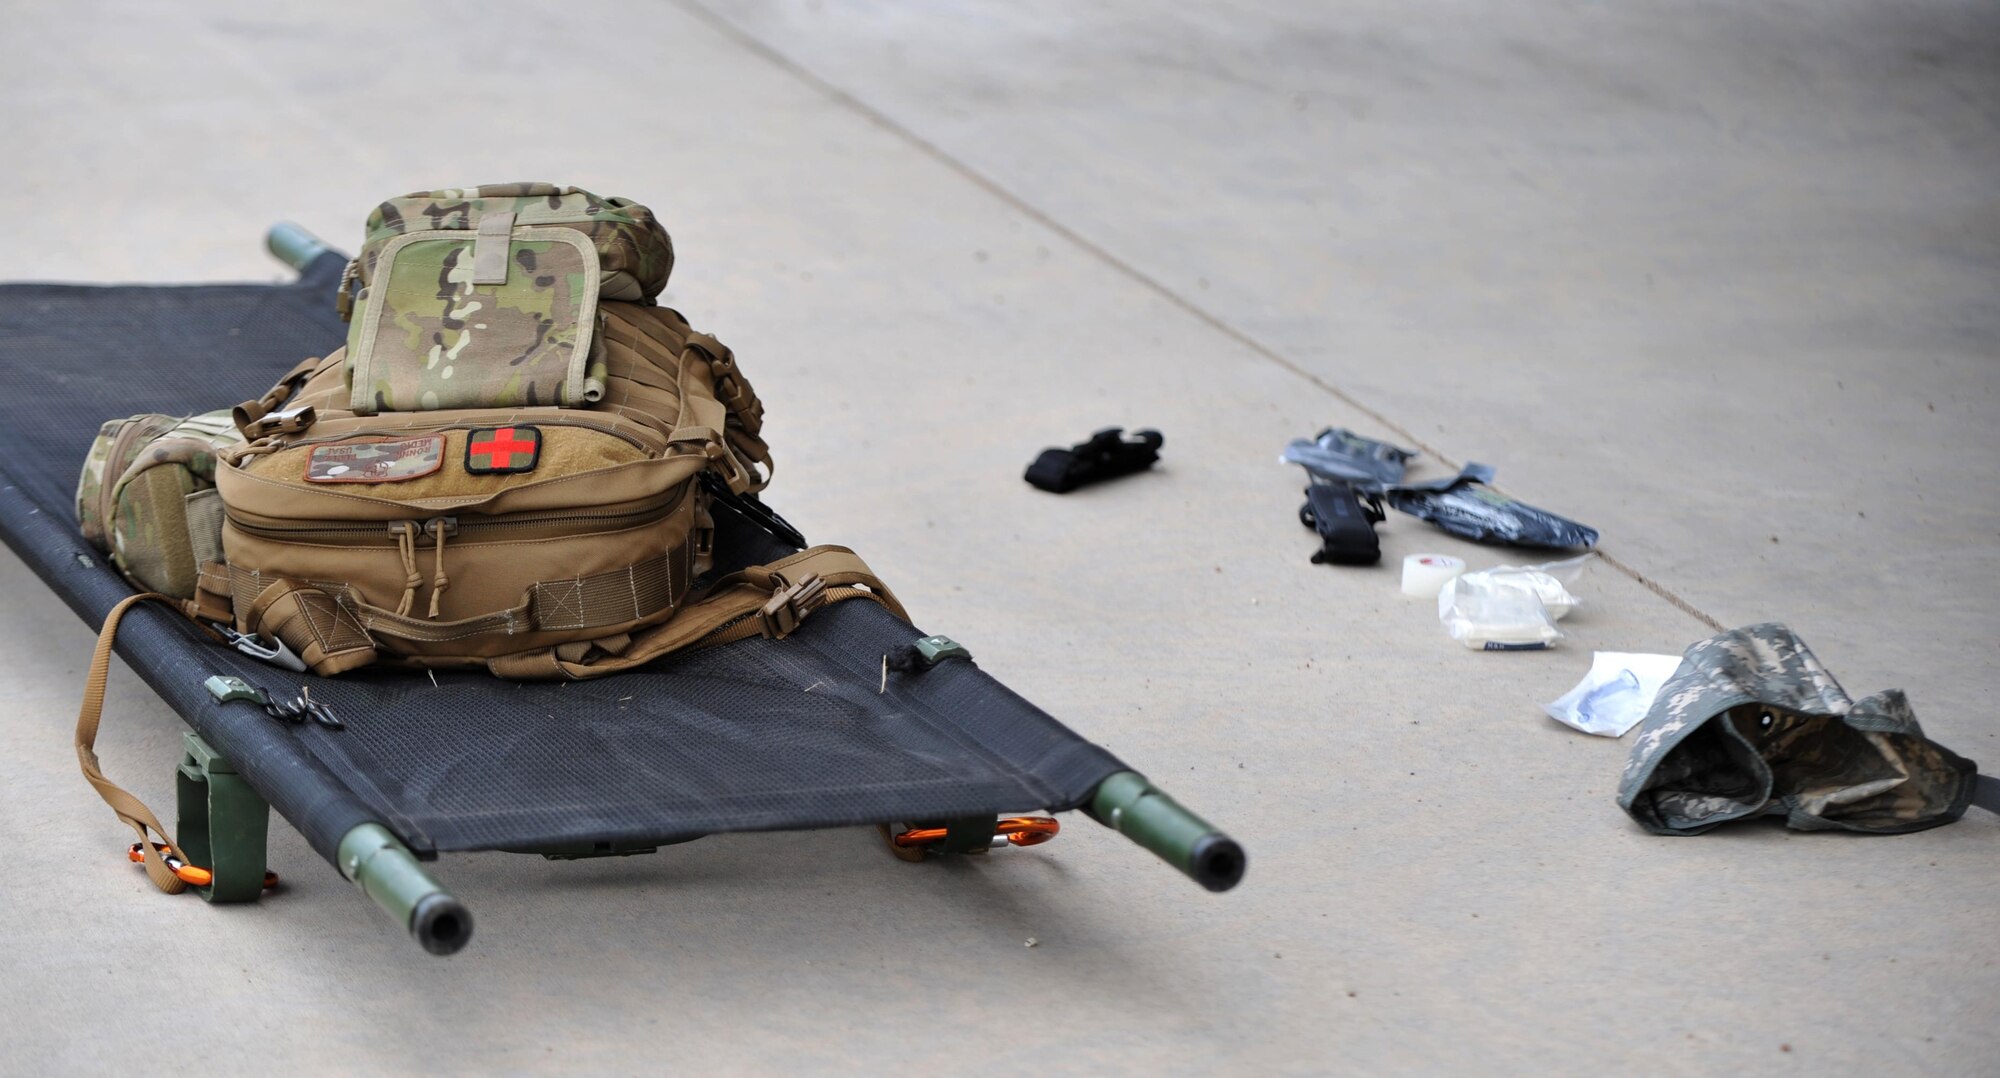 Senior Airman Ronnie Perez, 460th Medical Operations Squadron medical technician, displays his medical gear prior to beginning his combat medicine lesson for Company A, Marine Cryptologic Support Battalion Aug. 17, 2016, at the U.S. Air Force Academy, Colo. Perez is certified as an Emergency Medical Technician and Self Aid Buddy Care instructor through the U.S. Air Force. (U.S. Air Force photo by Airman Holden S. Faul/ Released